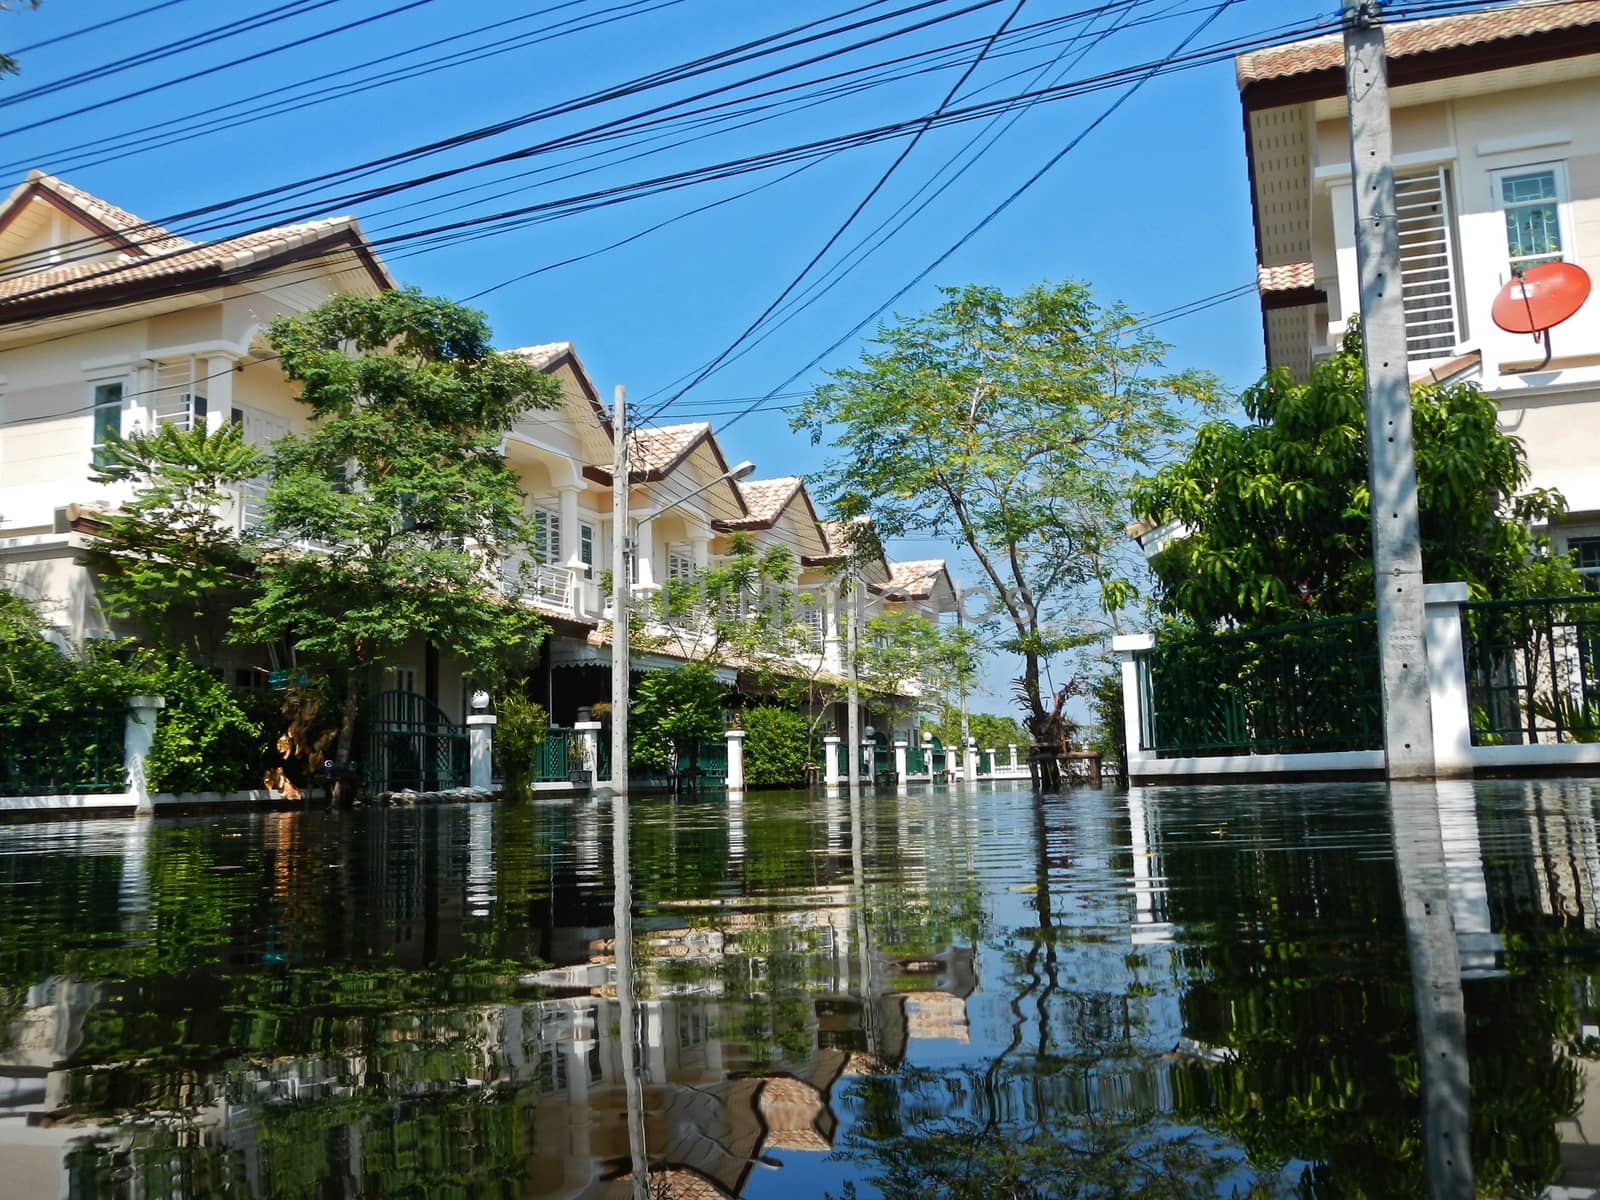 flood waters overtake a house in Thailand by think4photop